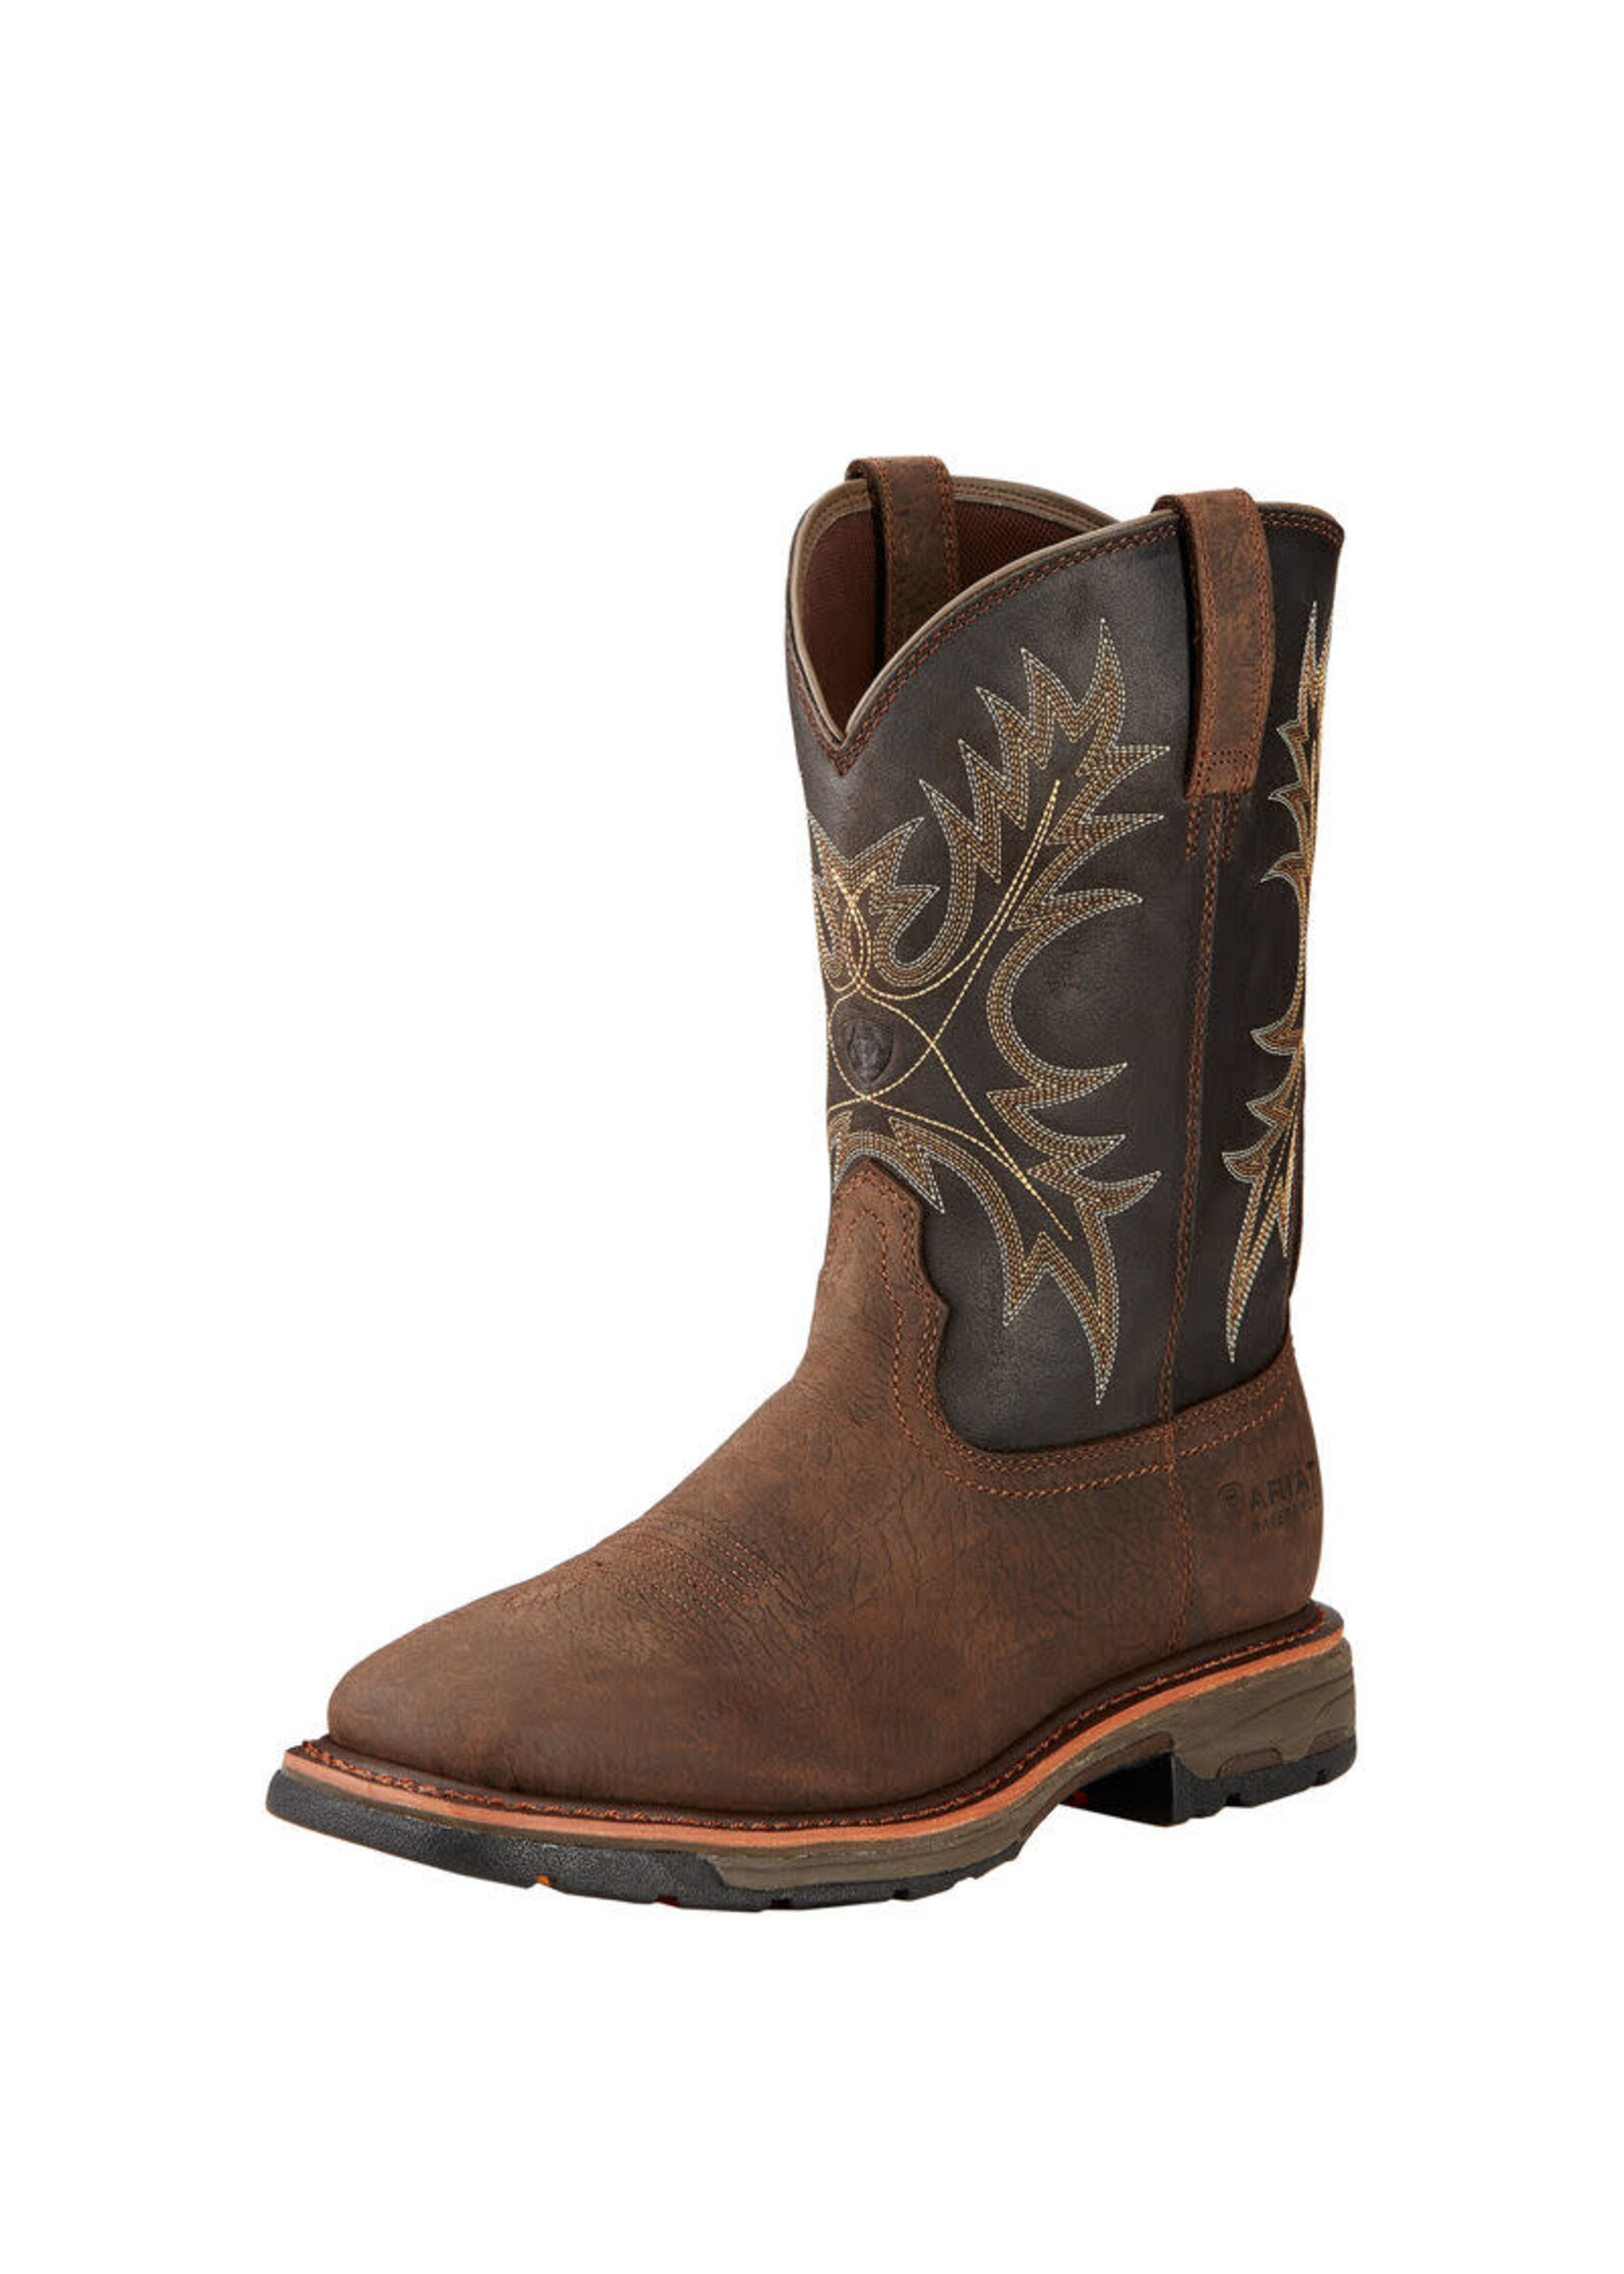 Ariat ARIAT 10017436 WorkHog H2O Wide Square